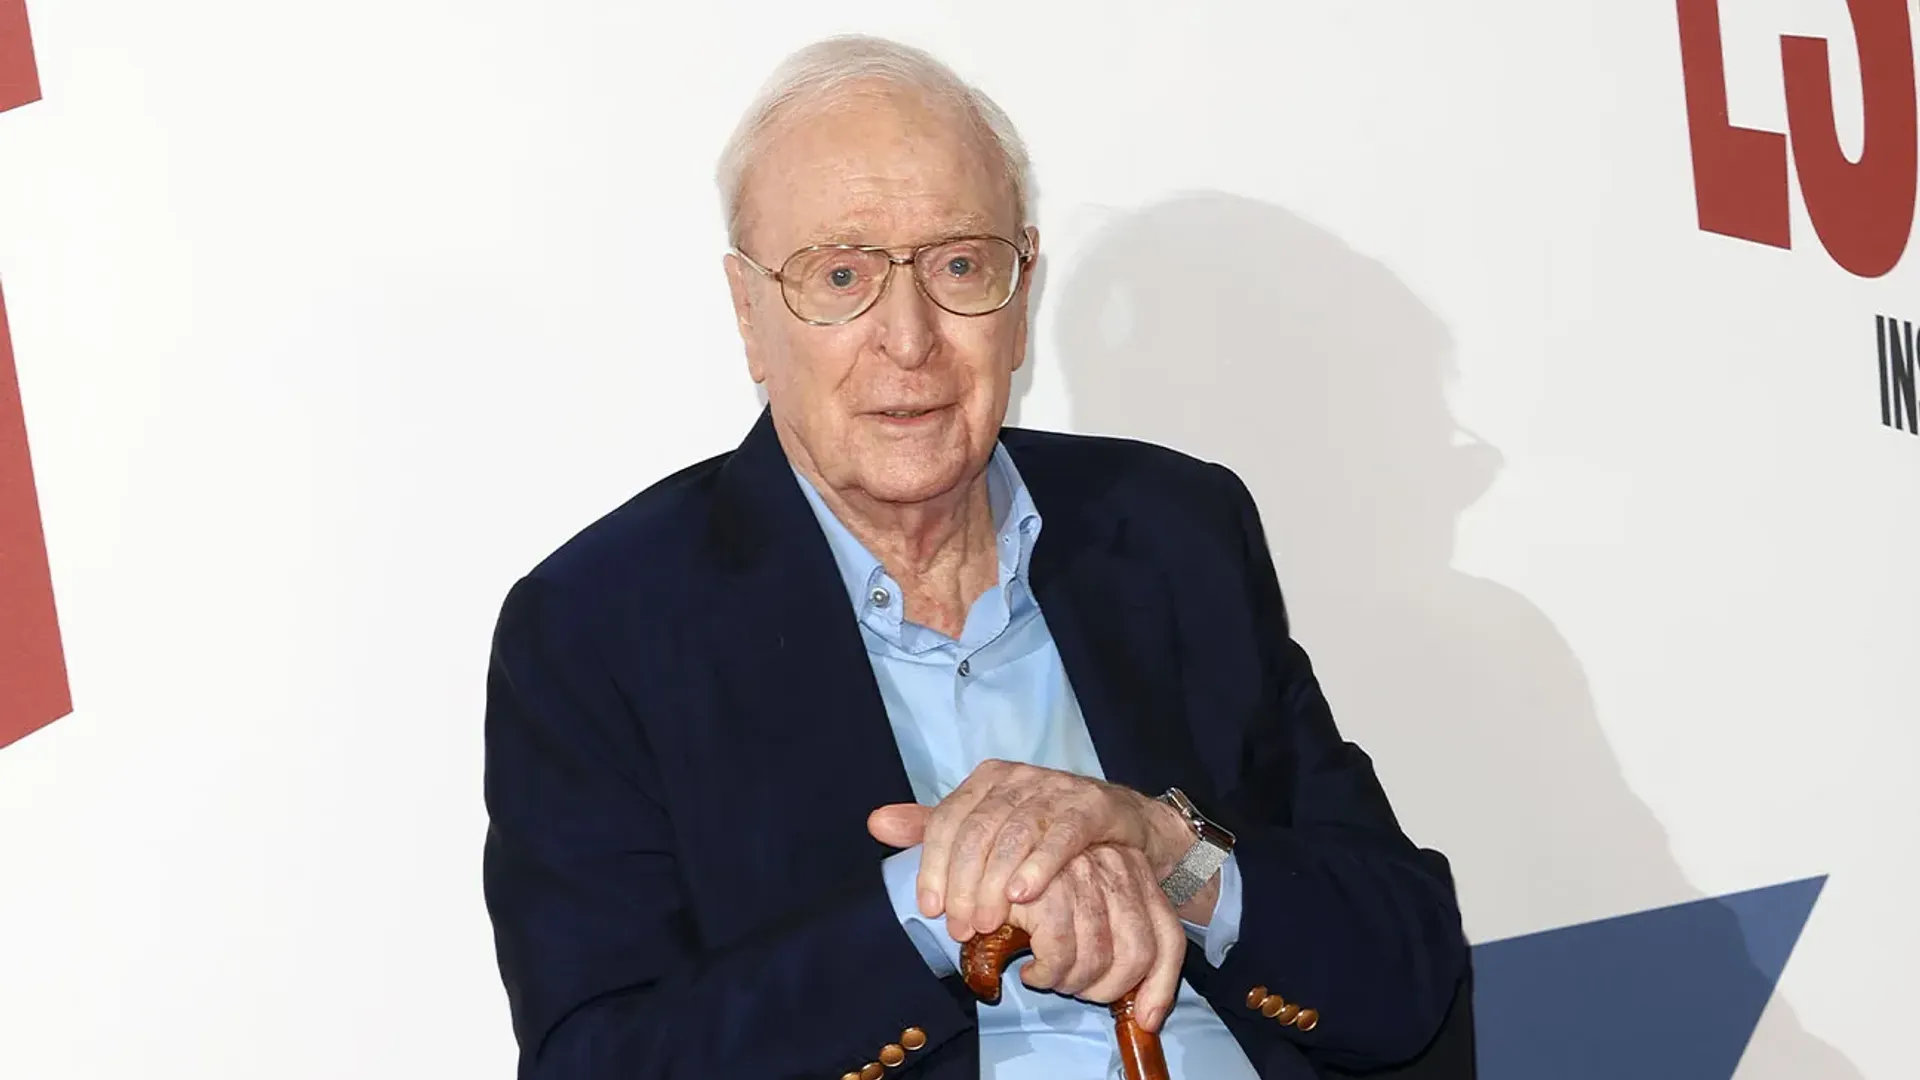 Michael Caine is finishing his acting career